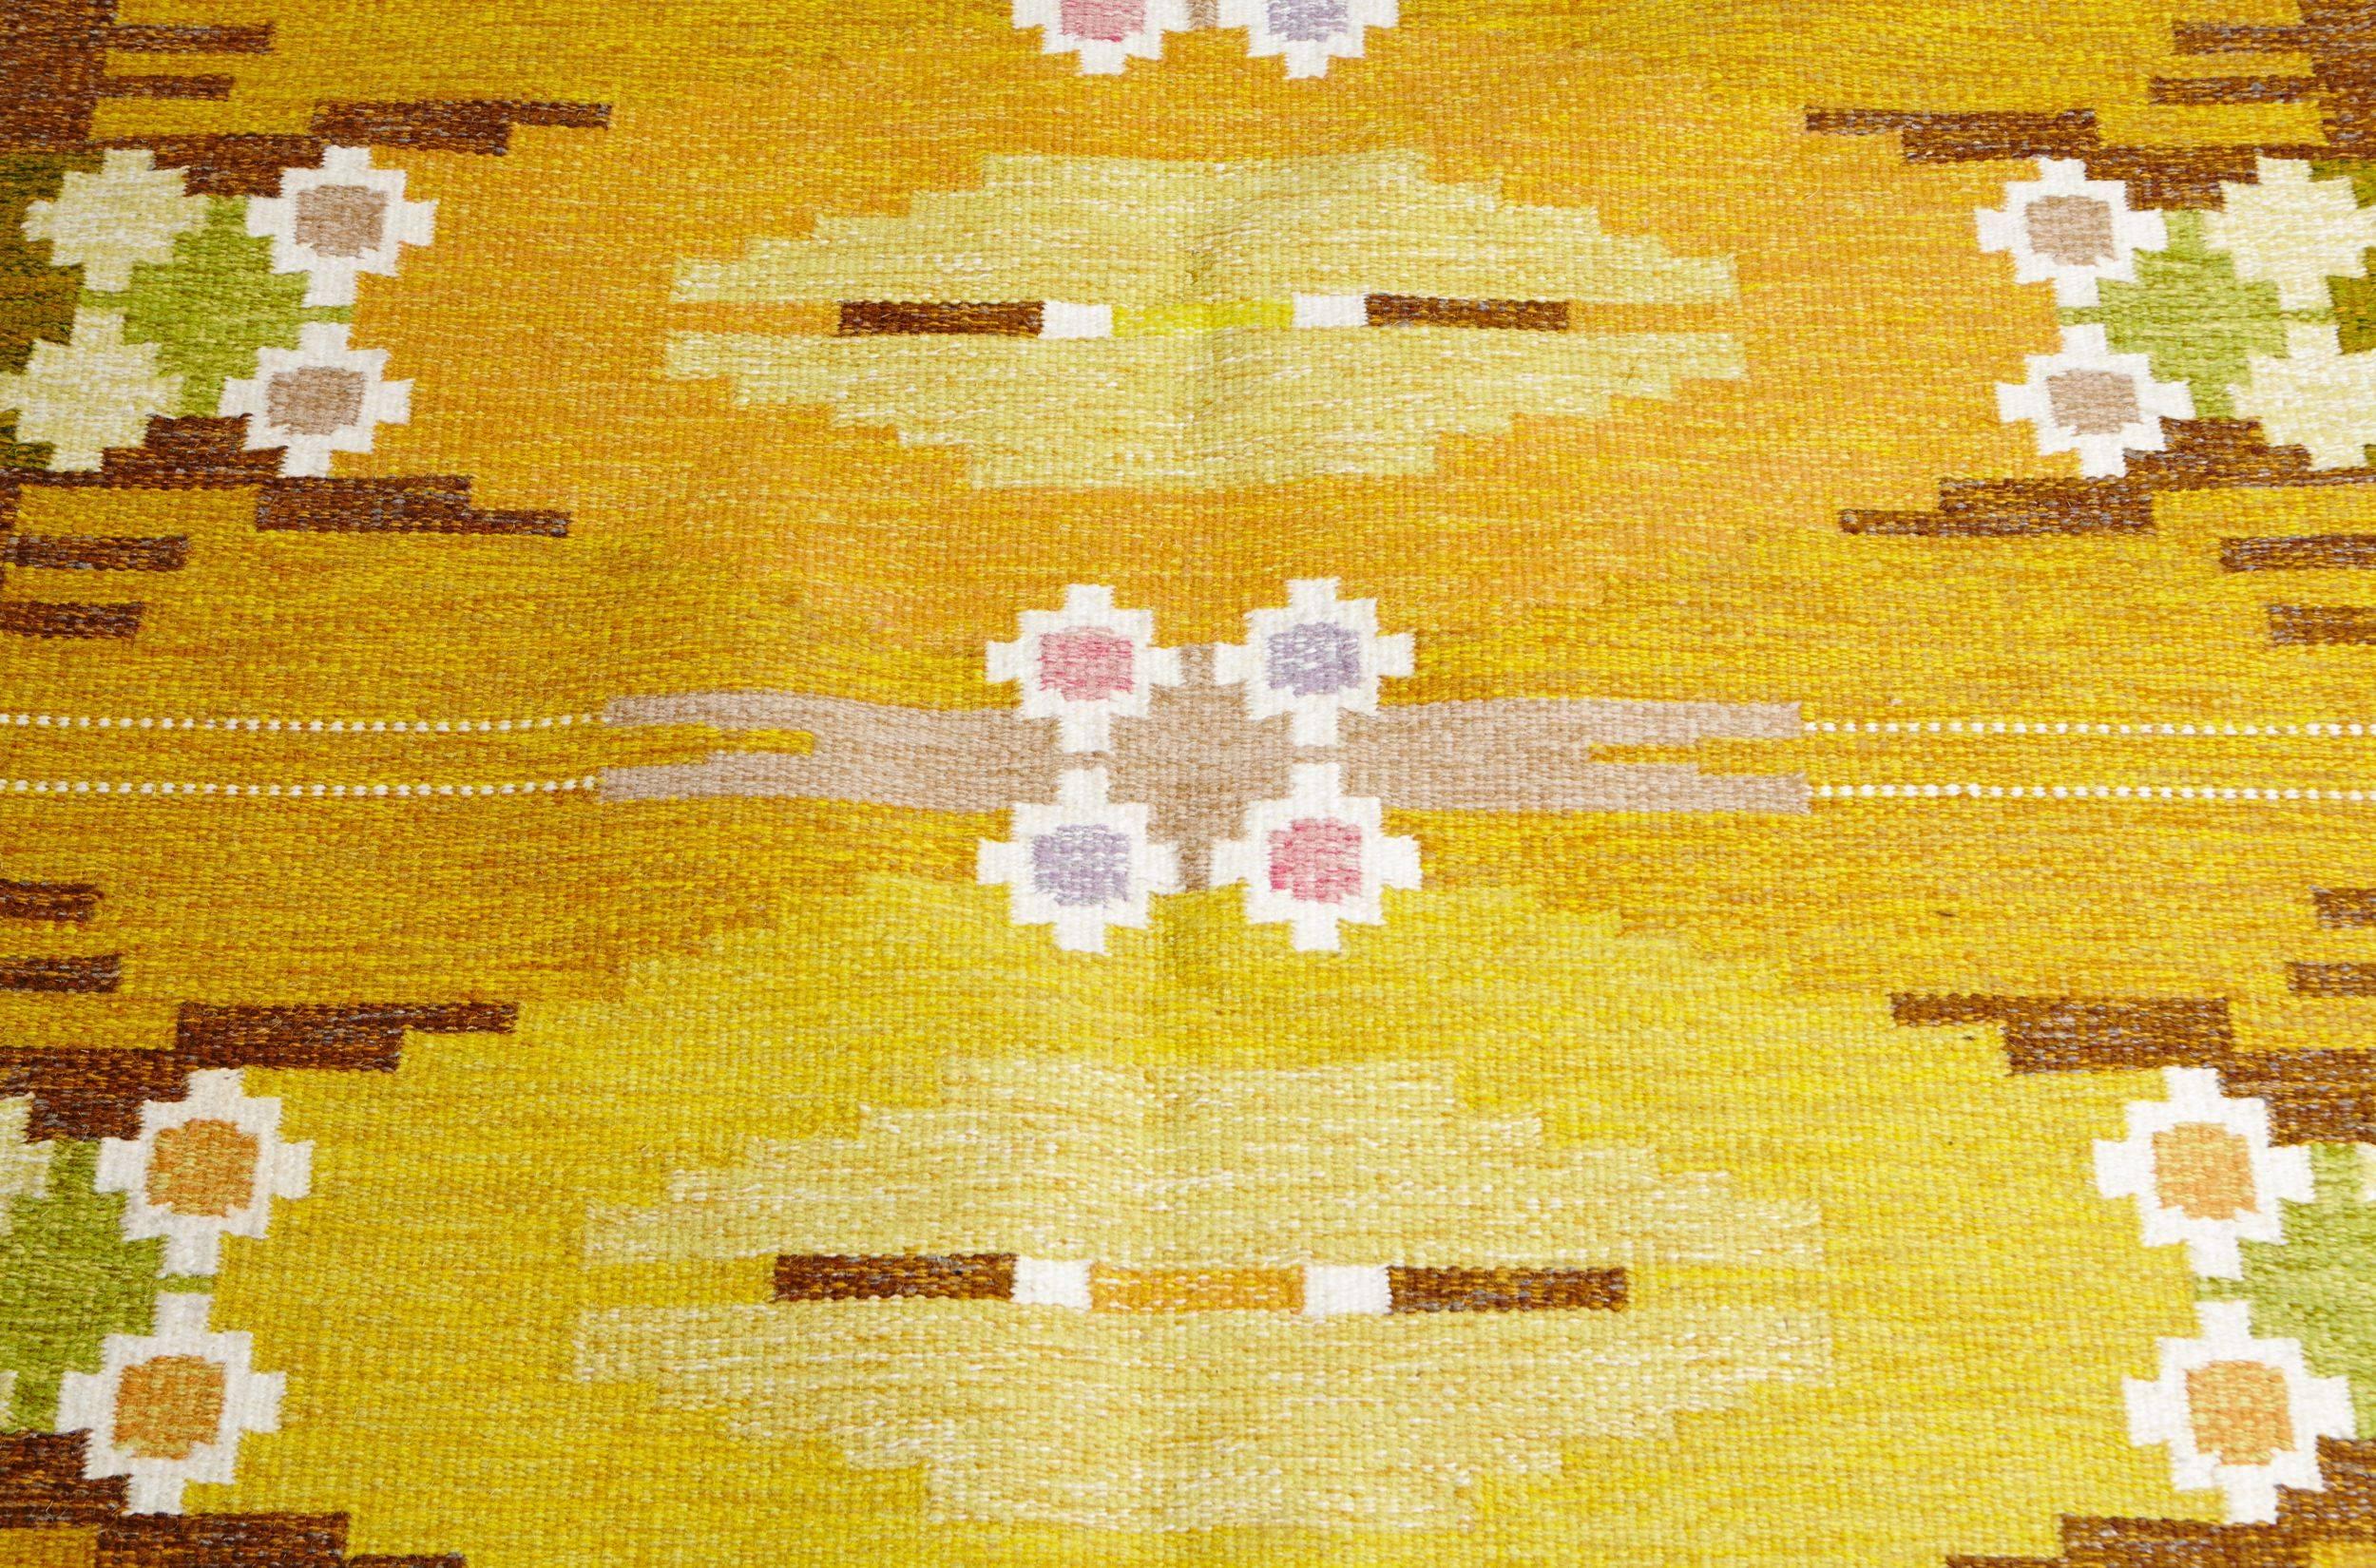 Swedish flat-weave carpet. Probably produced by Axeco Svenska AB.
Linen warp and wool, in very good condition. Beautiful colors: Yellows, brown, greens, purple and pink.
Measures: 230 x 170 cm.